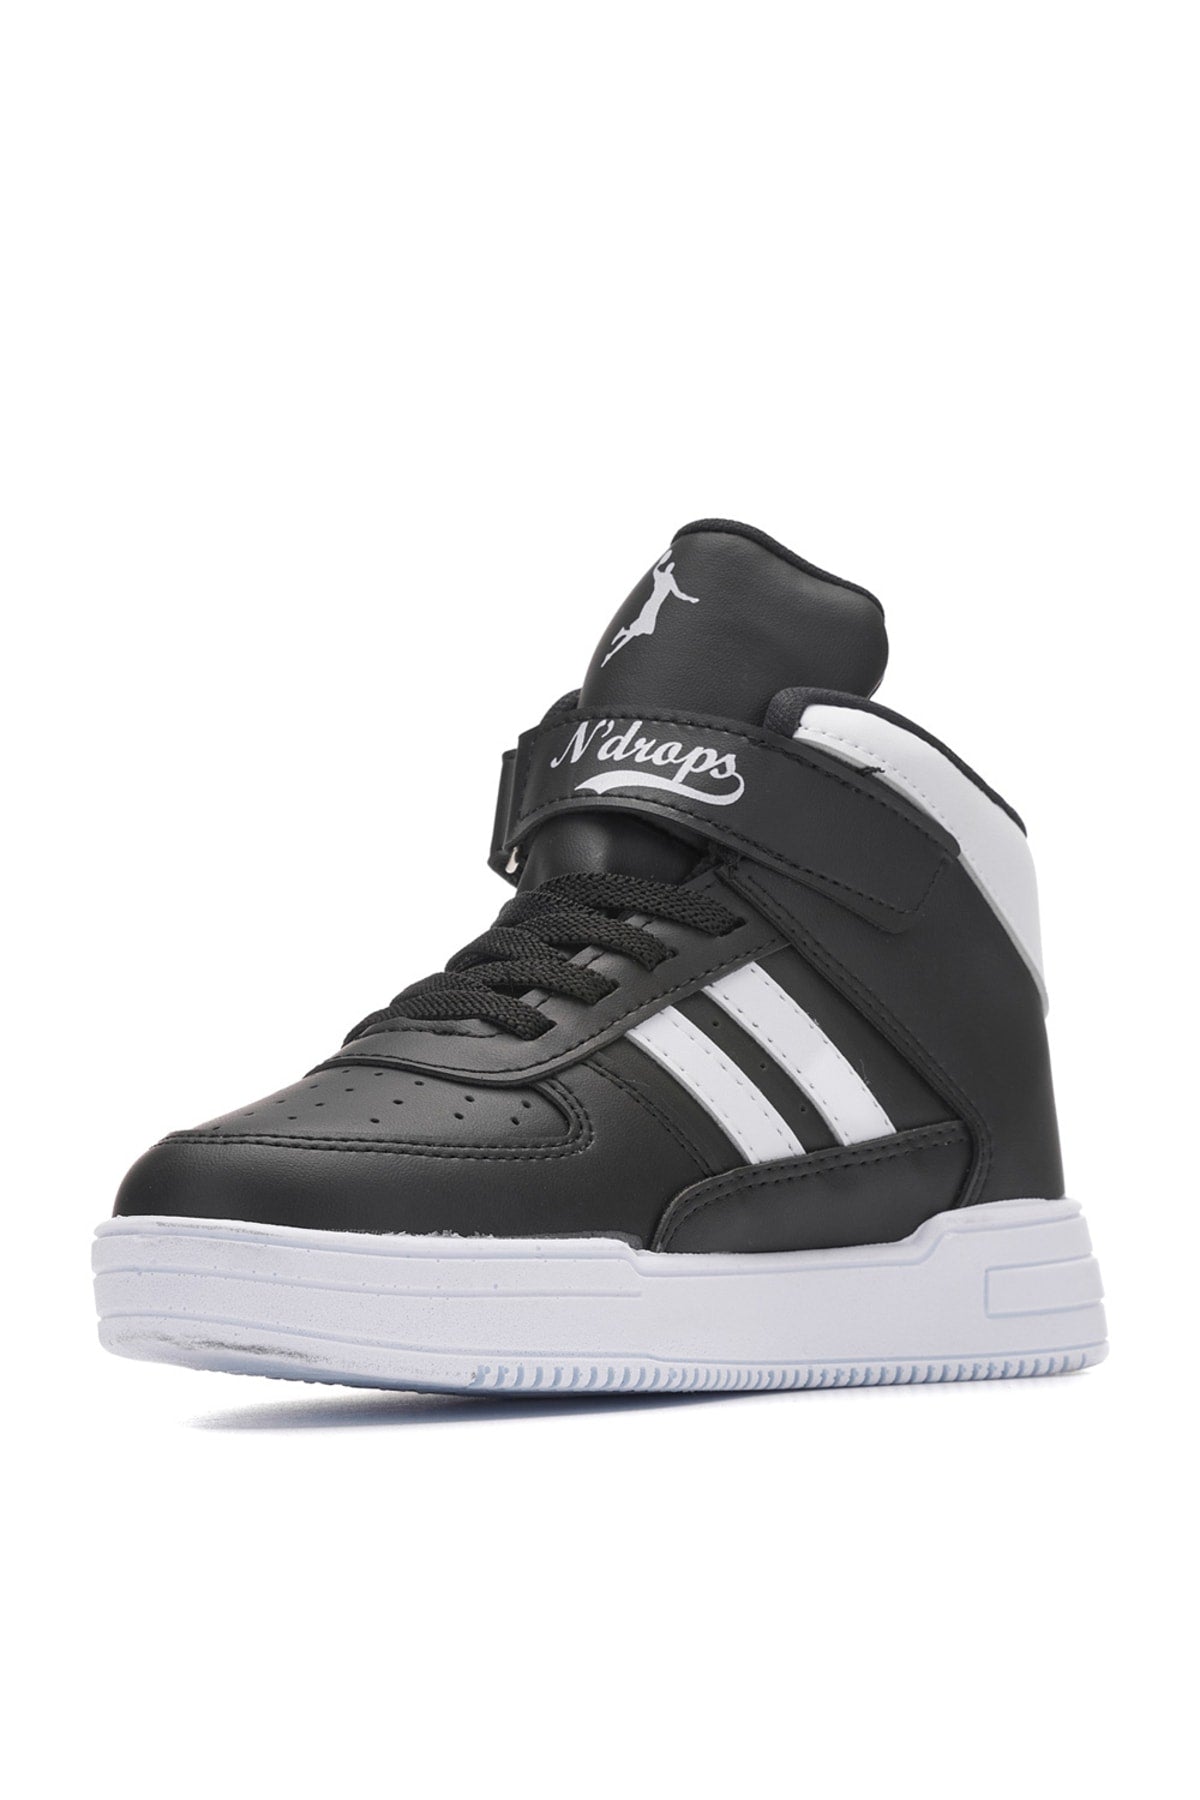 High Top, Orthopedic, Velcro, Black and White Color Kids Sports Shoes